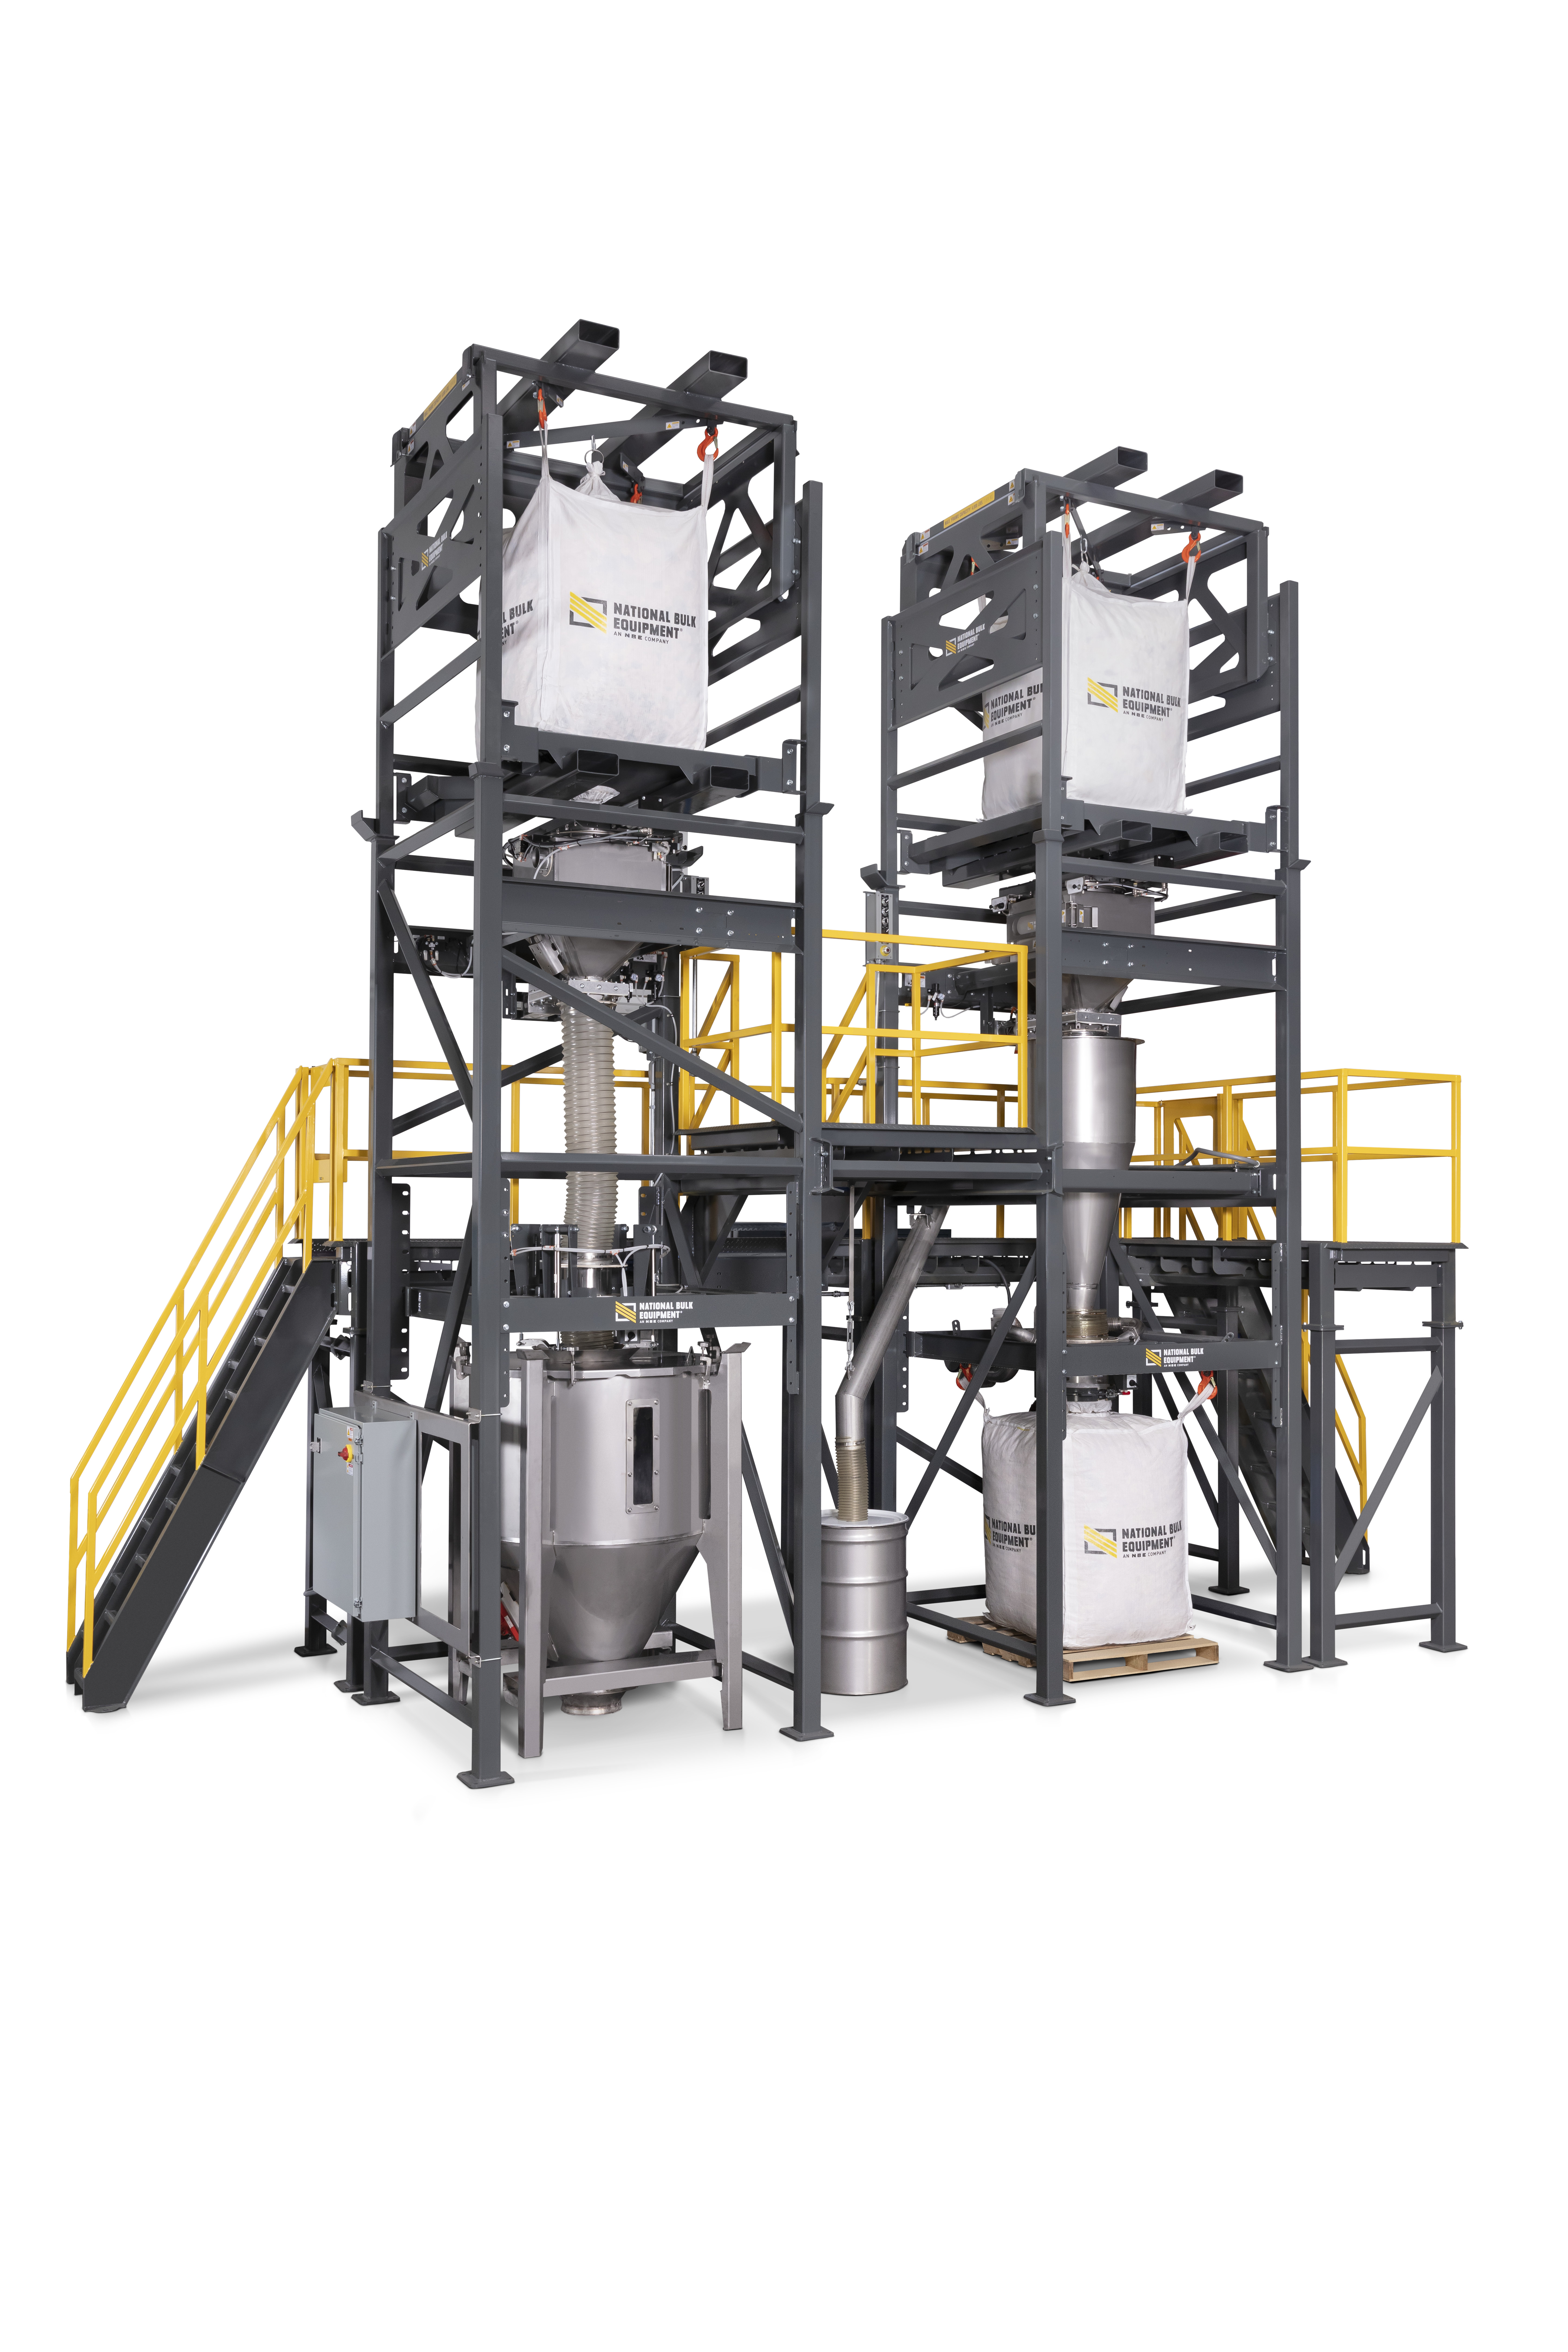 Engineered-to-Application Bulk Material Processing and Packaging Project Increases Process Yield and Improves Downstream Production Throughput Efficiency